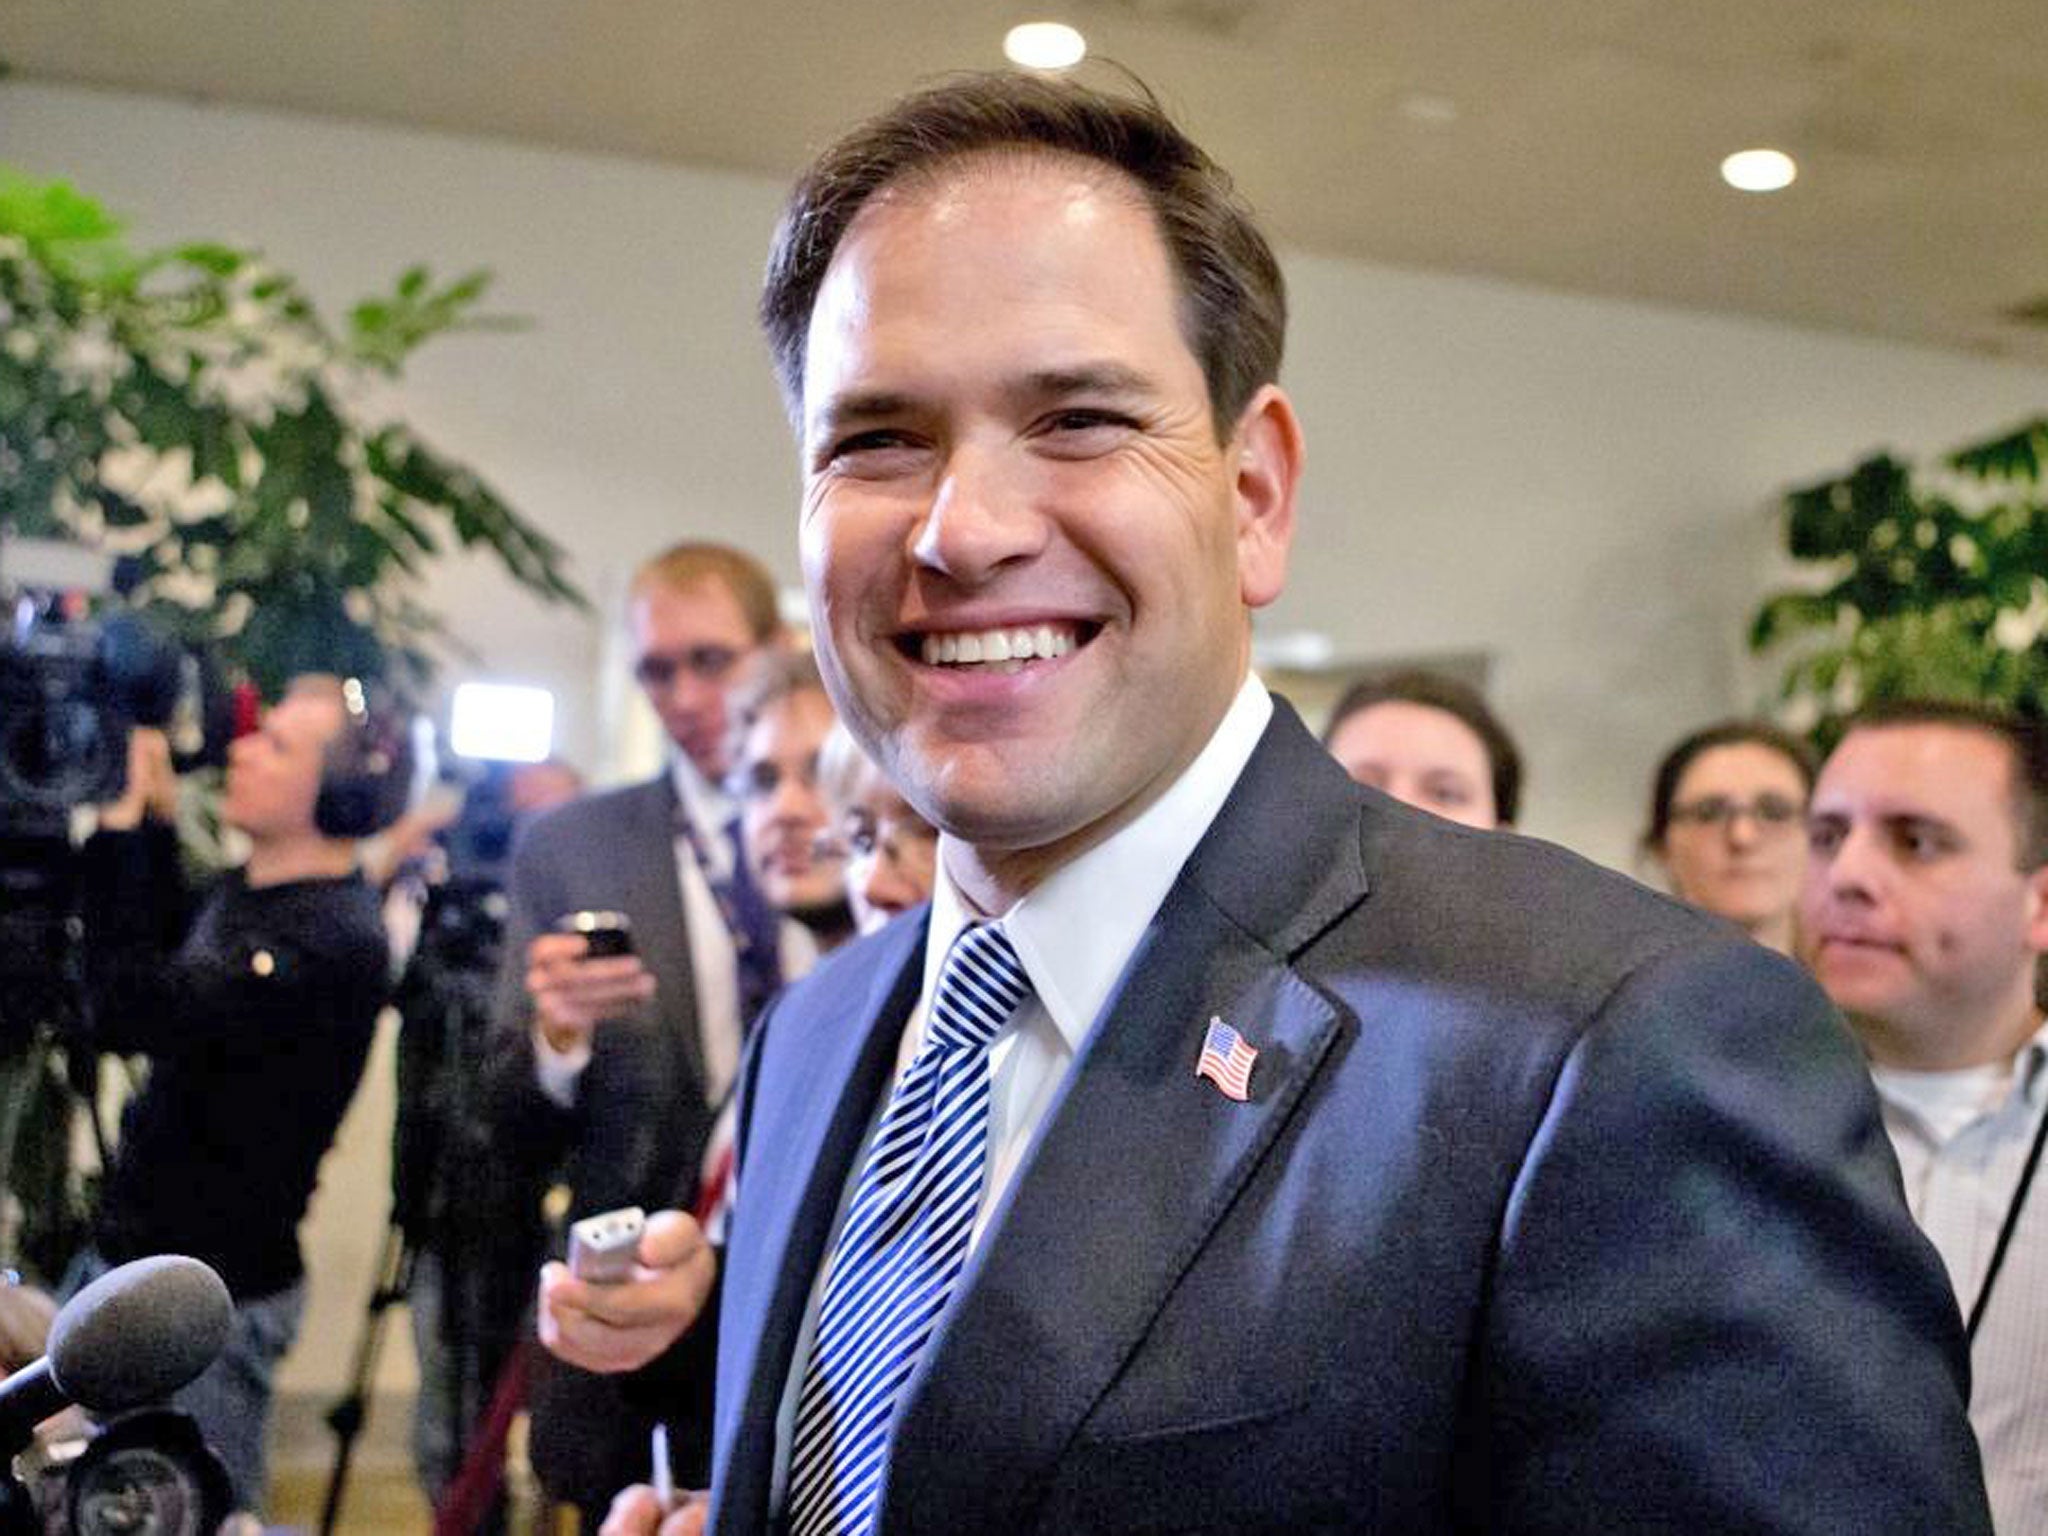 Marco Rubio, a member of the Senate Foreign Relations Committee has been in the right place at the right time